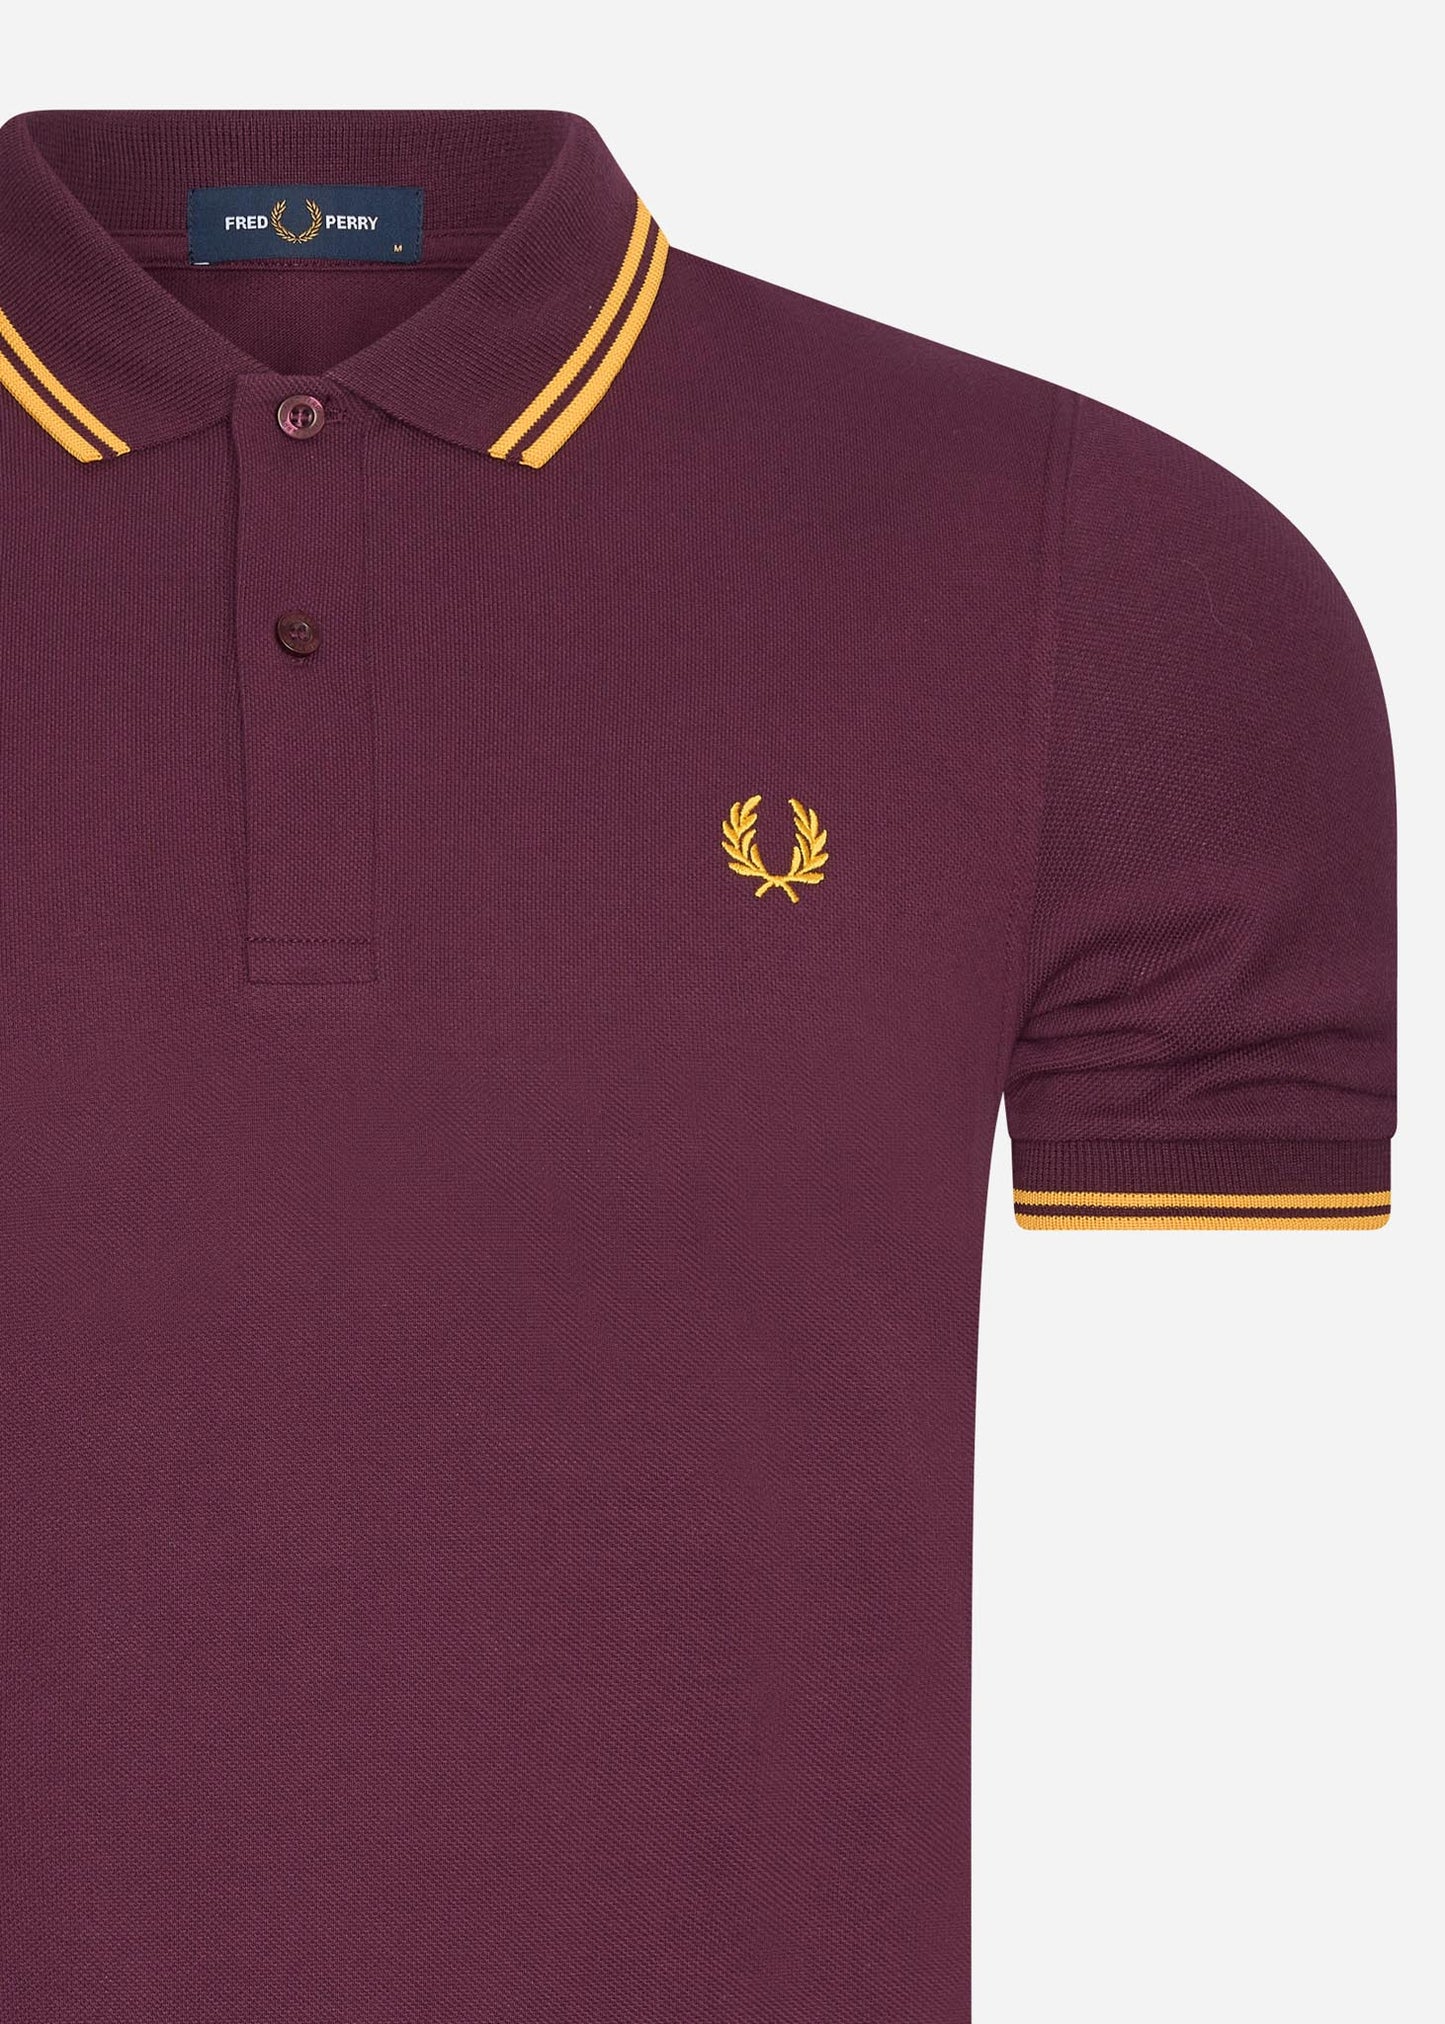 Twin tipped fred perry shirt - mahogany maize